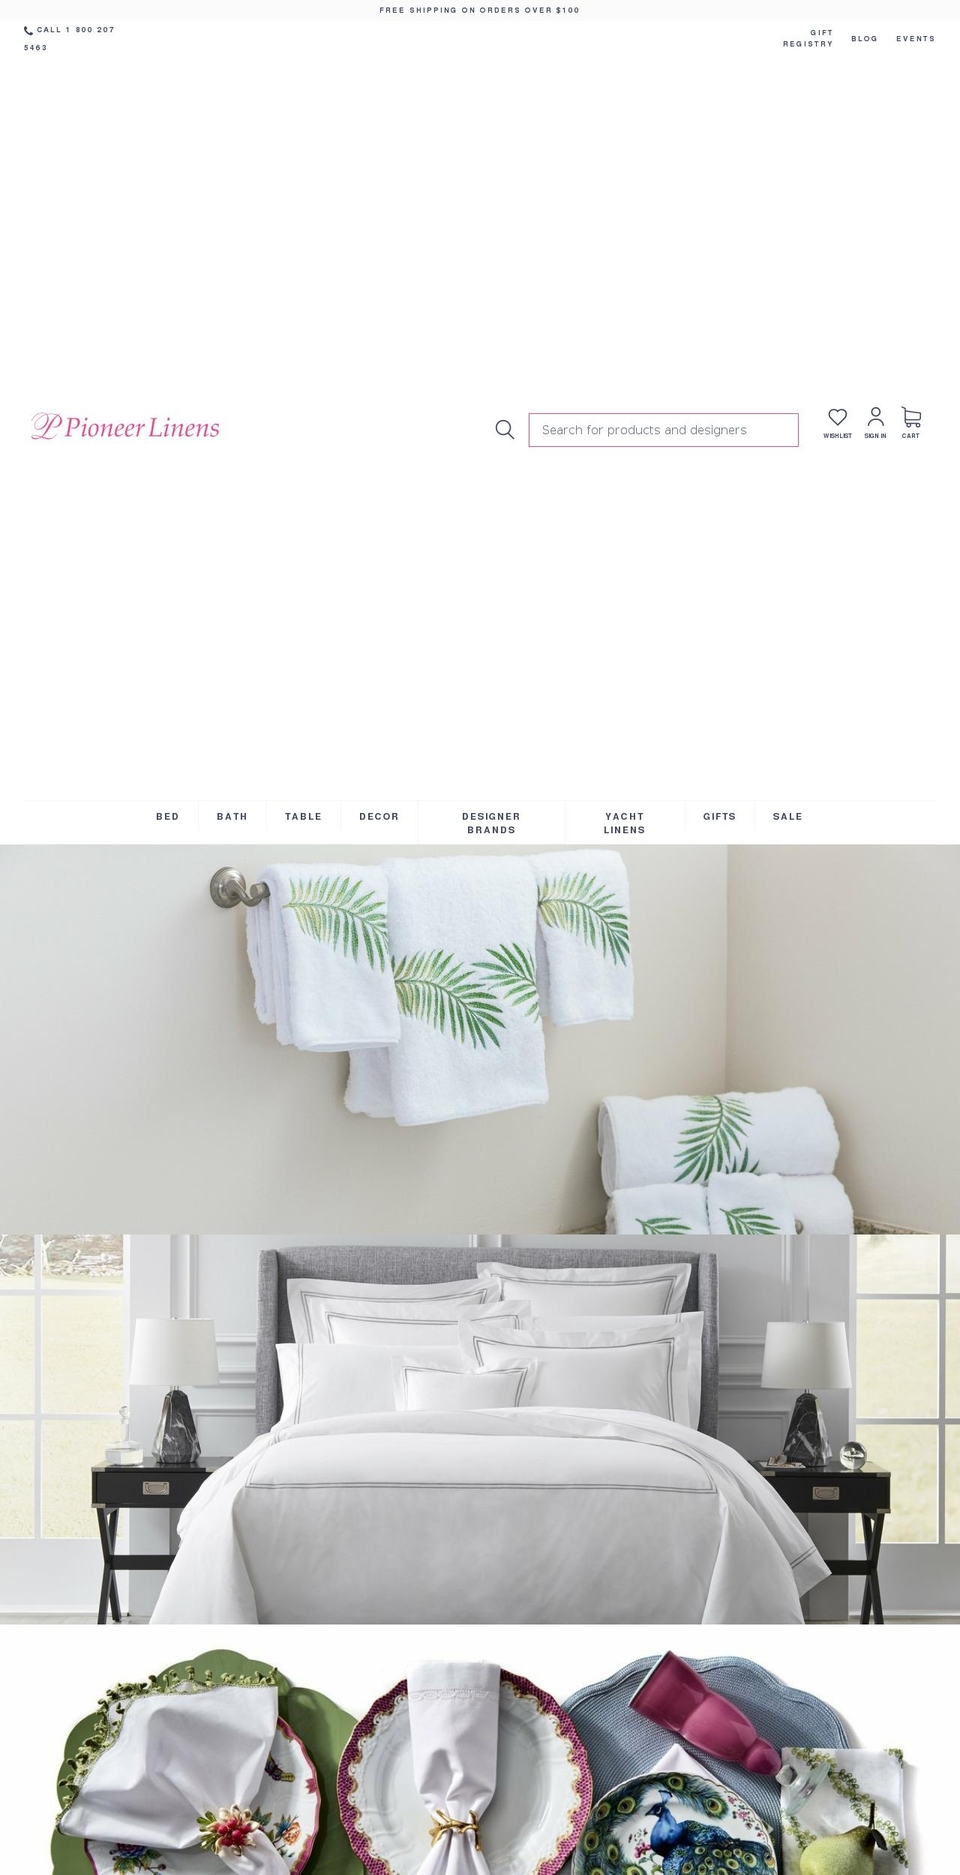 Buko Shopify Theme - Products Consolidation Shopify theme site example mpioneerlinens.us